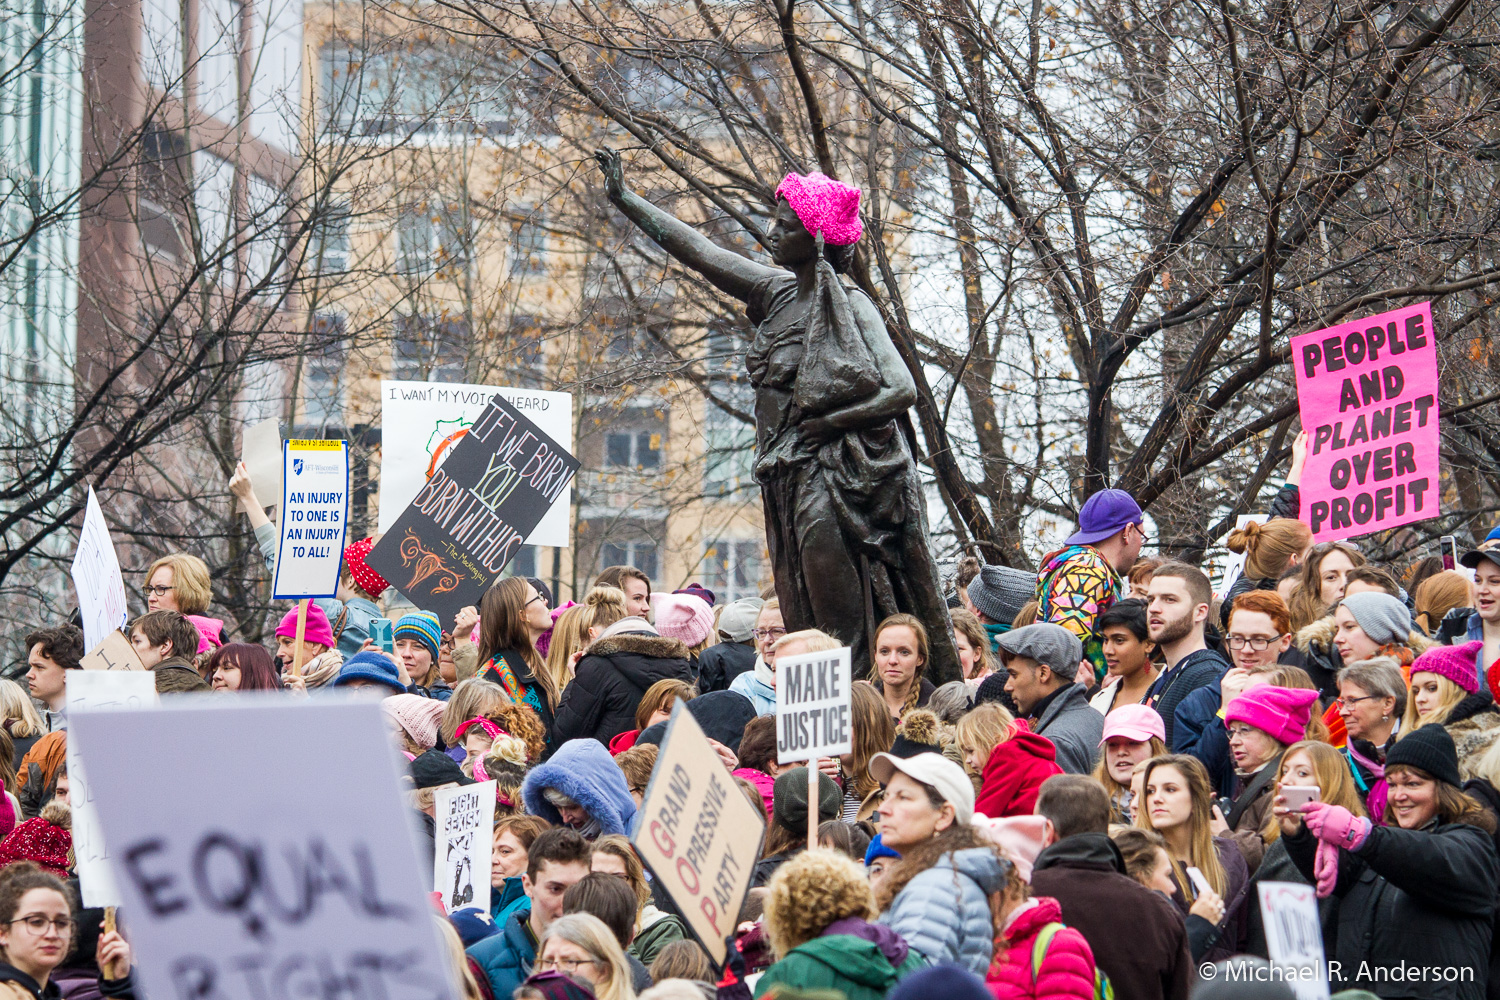 Women's March on Madison anderson viewpoint photography